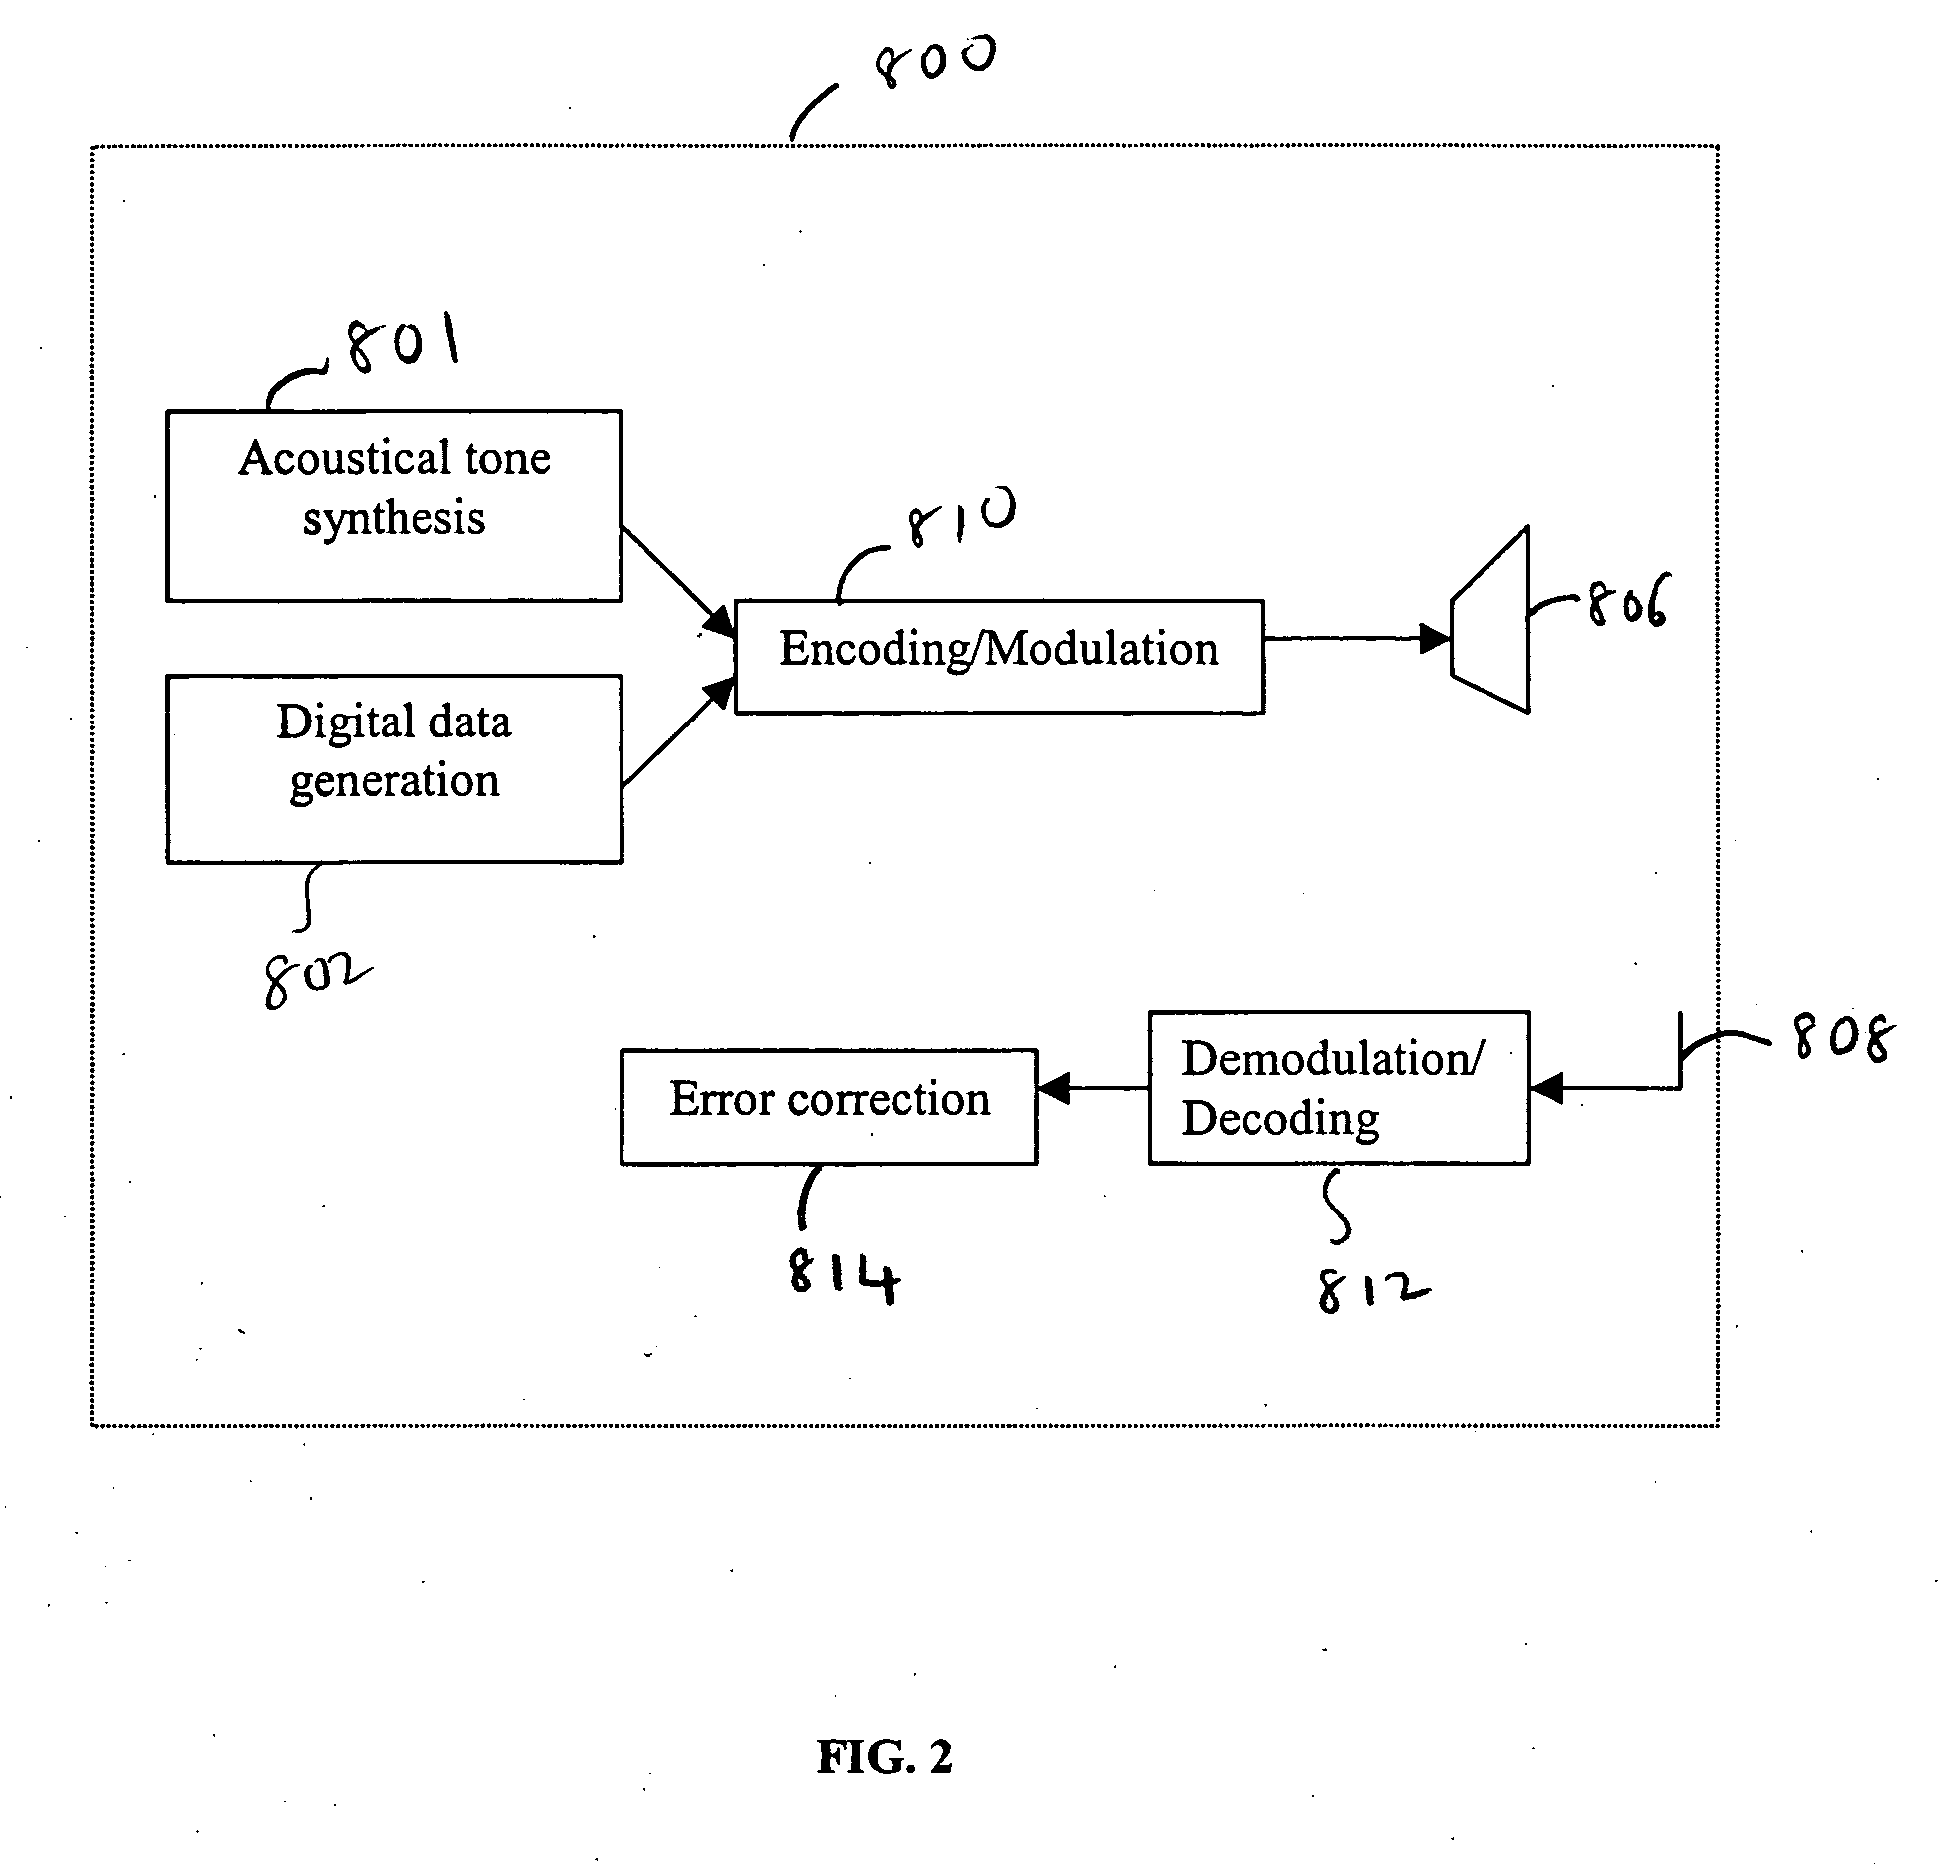 System and method for encoding and decoding digital data using acoustical tones